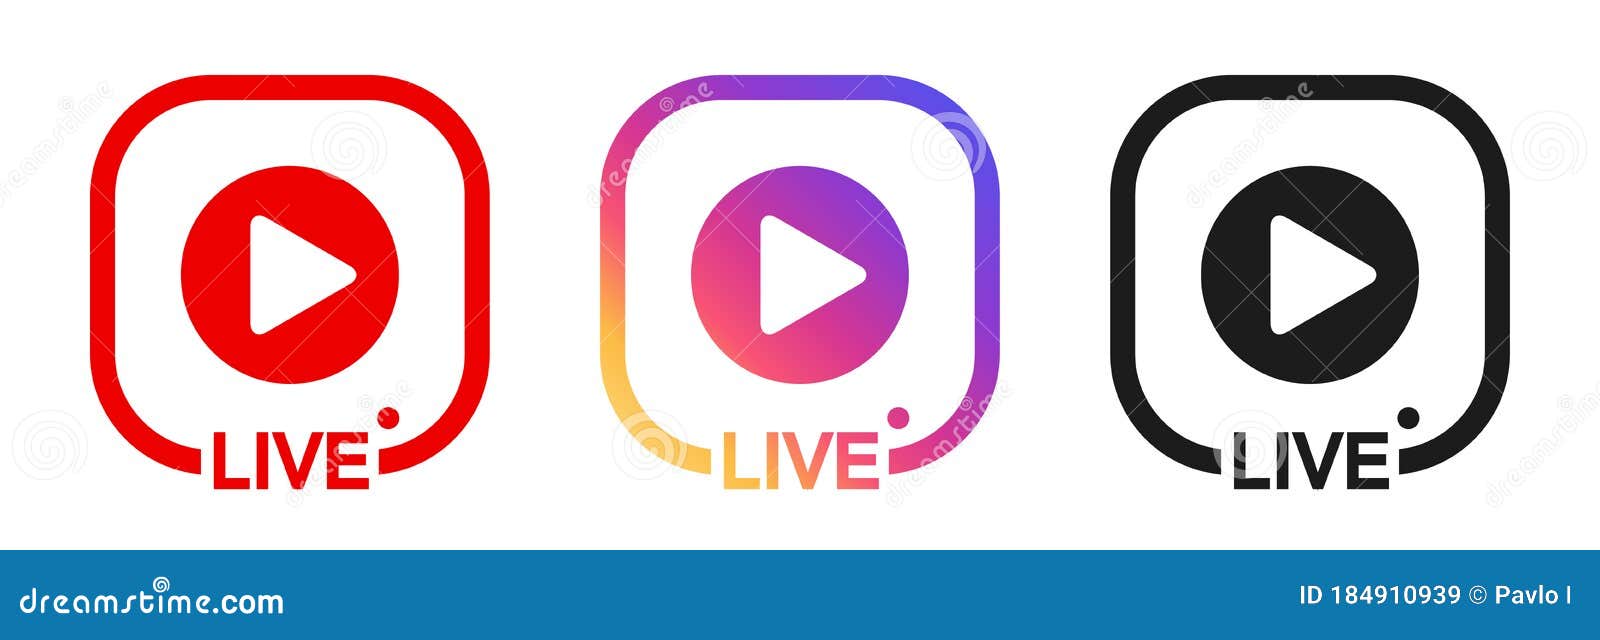 live icon for social media, play button, live stories video streaming, instagram style streaming sign, online blog banner